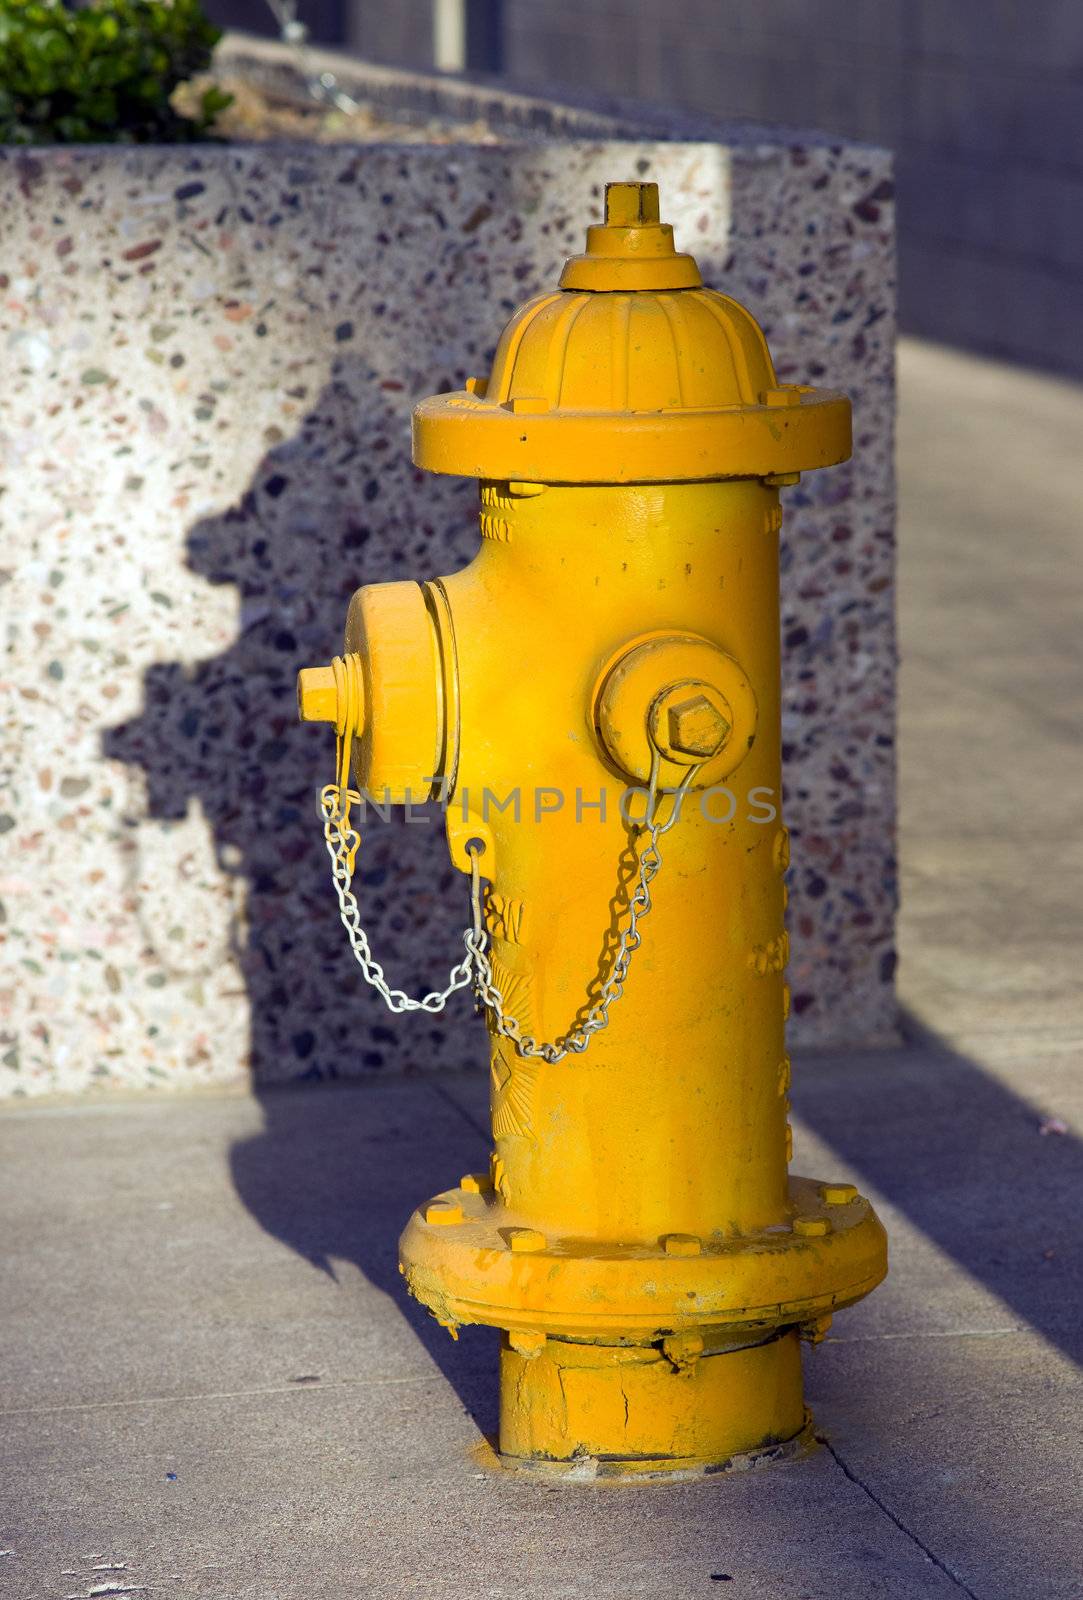 Fire Hydrant in the city